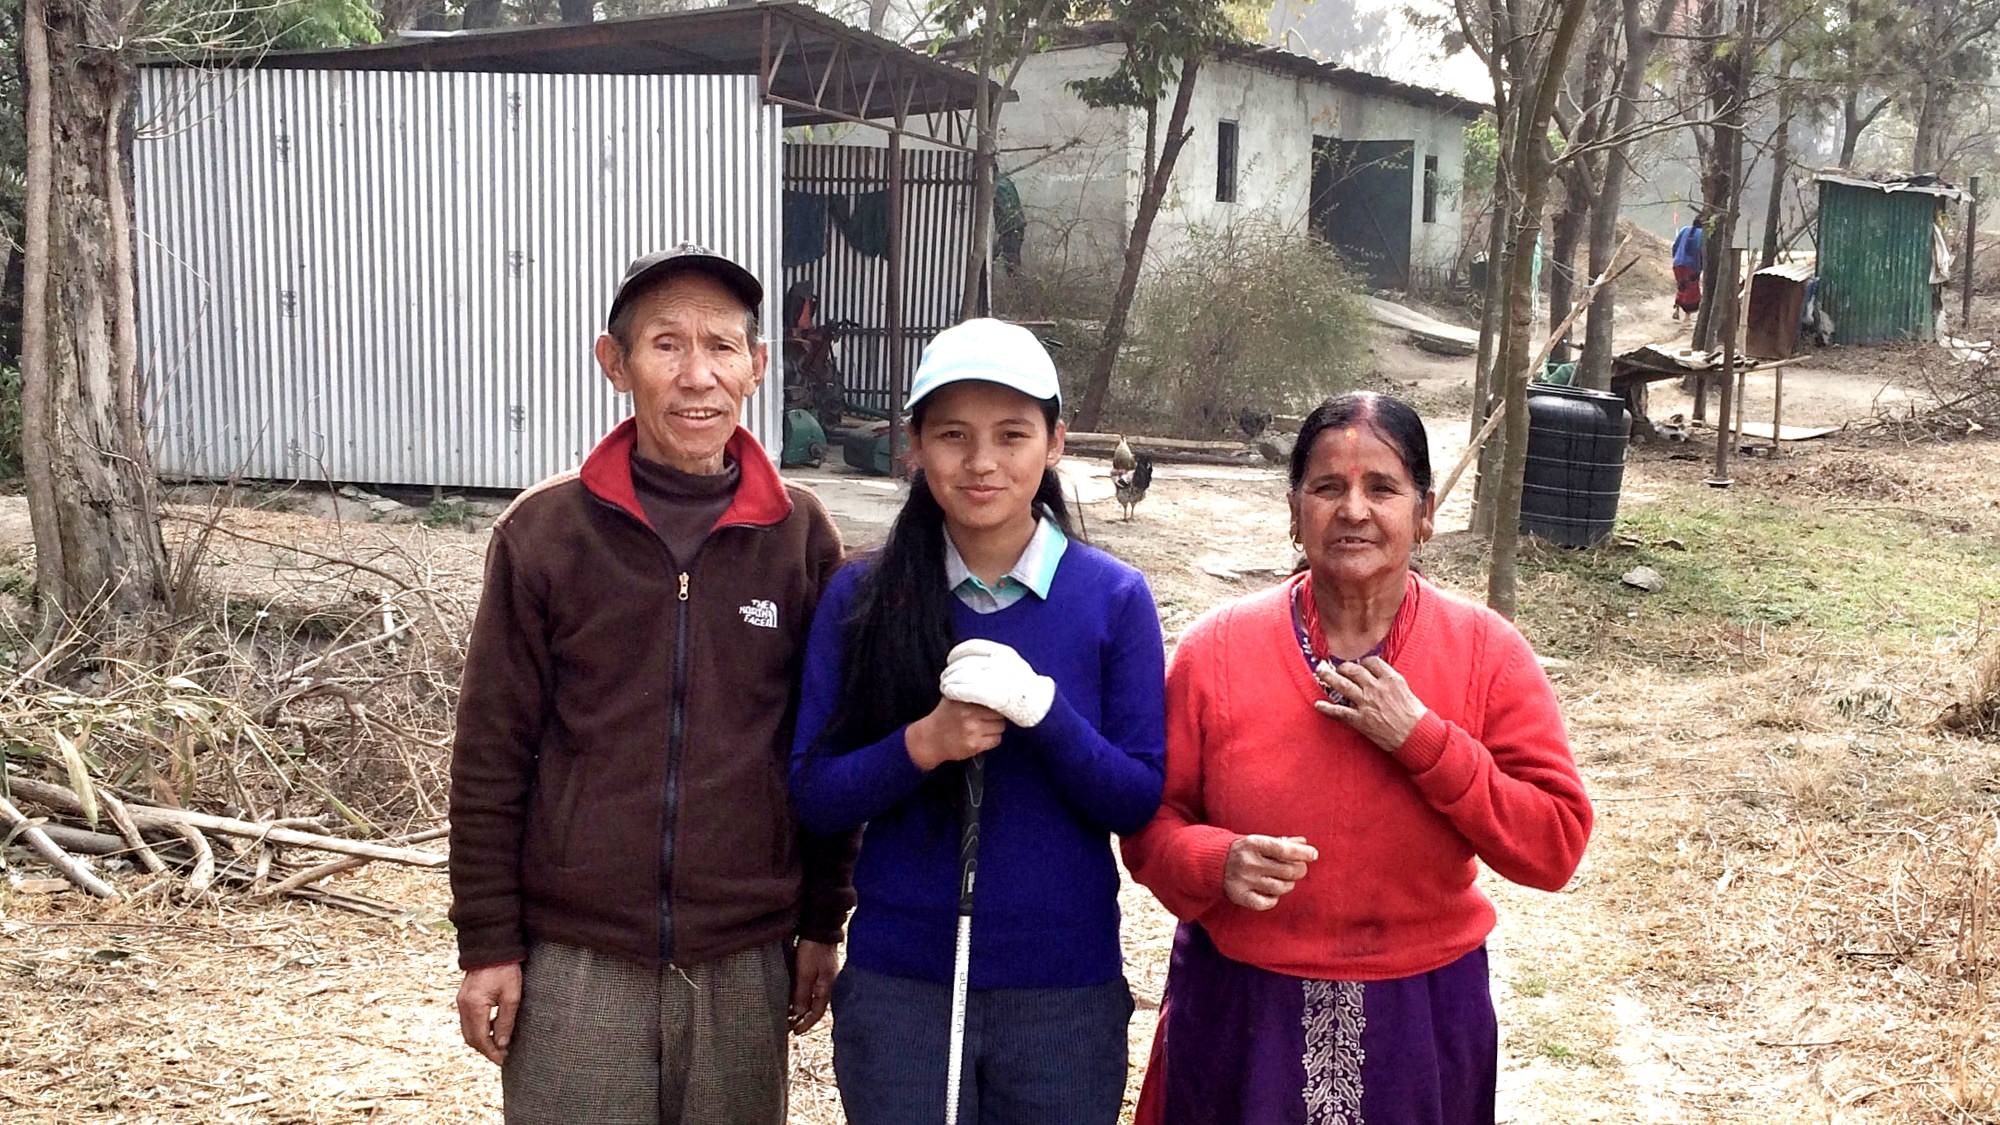 Meet the girl trying to become Nepal's first female professional